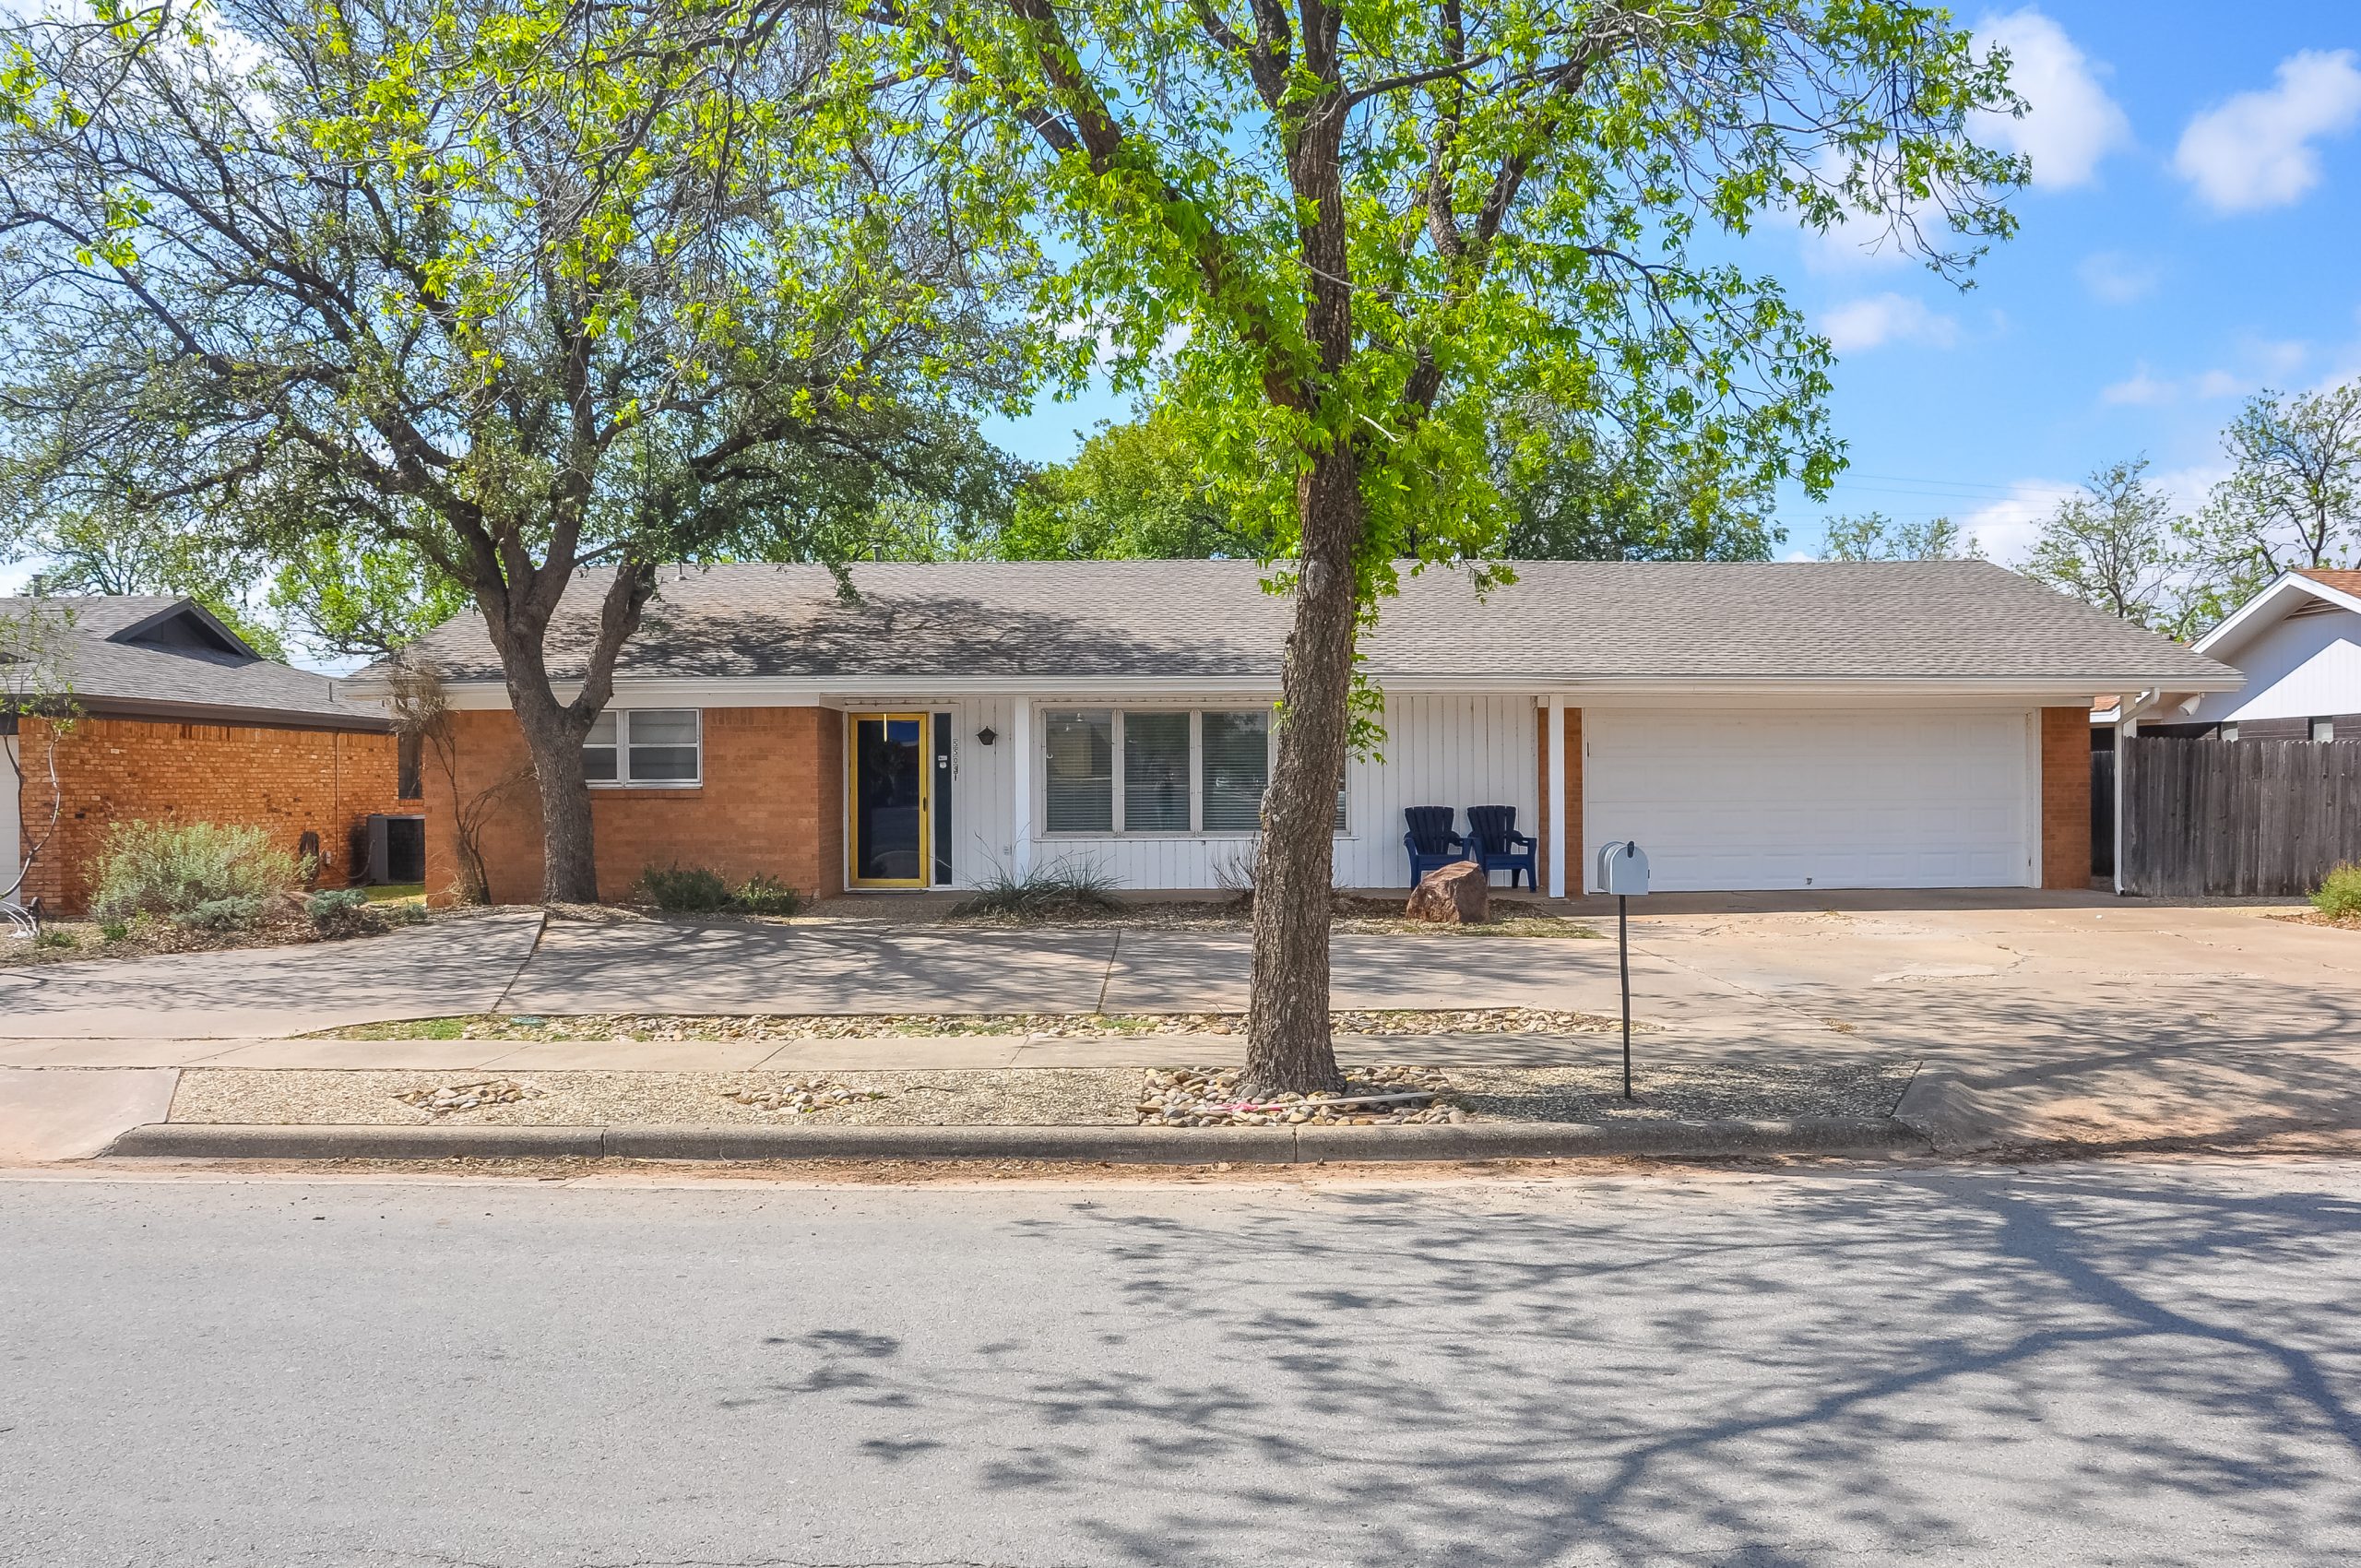 5509 26th St, Lubbock, TX (Sold)